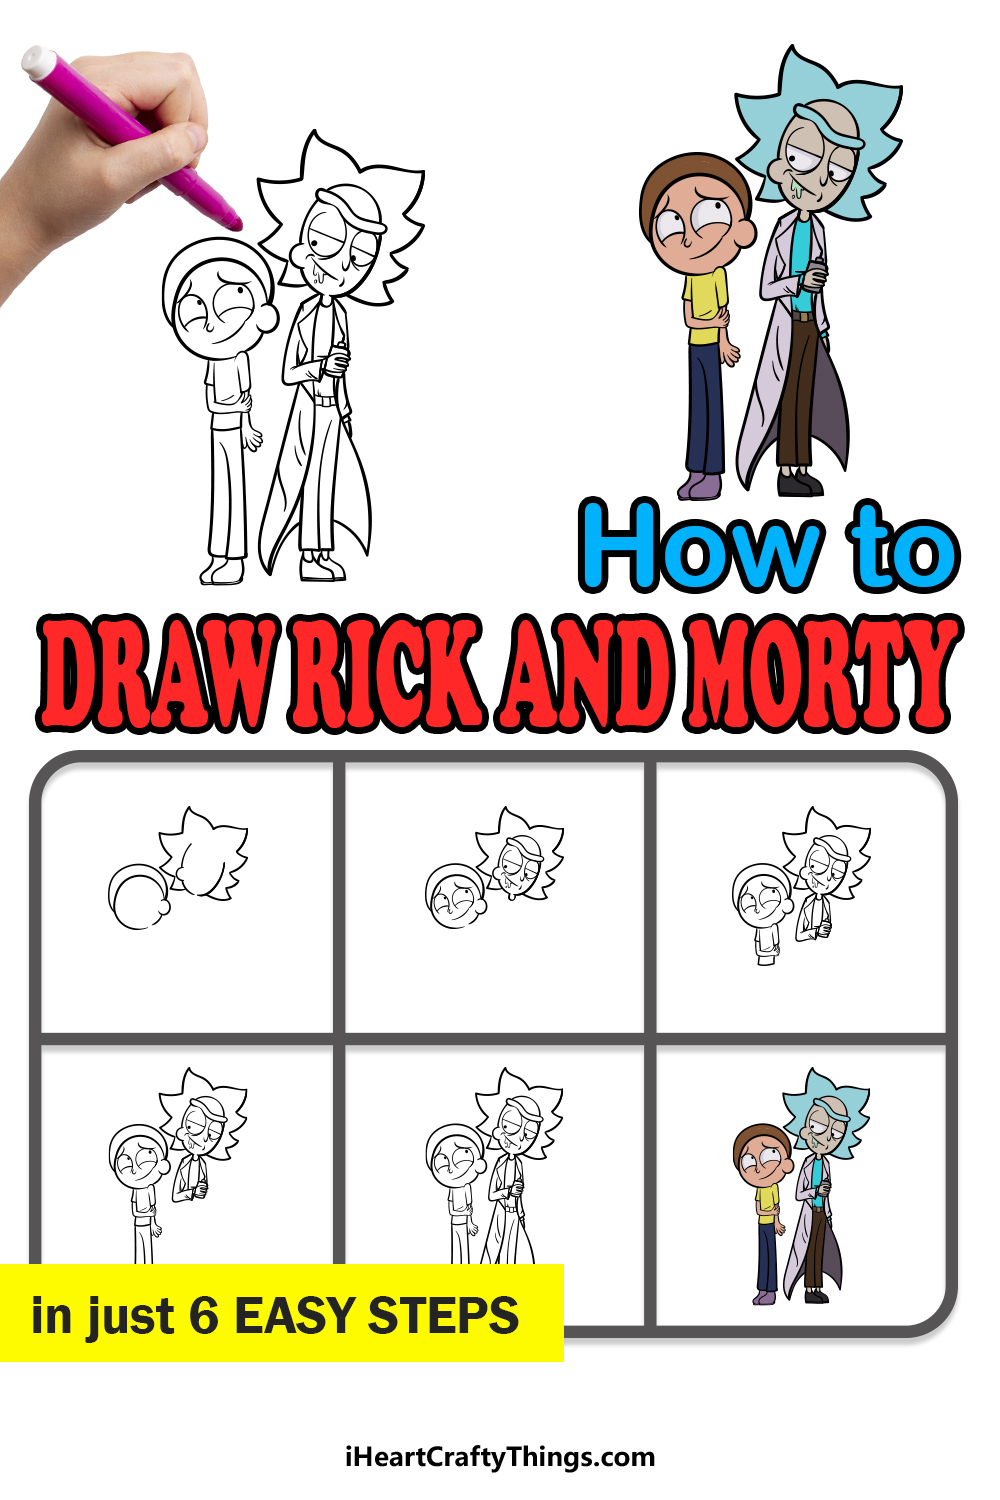 how to draw Rick and Morty in 6 easy steps